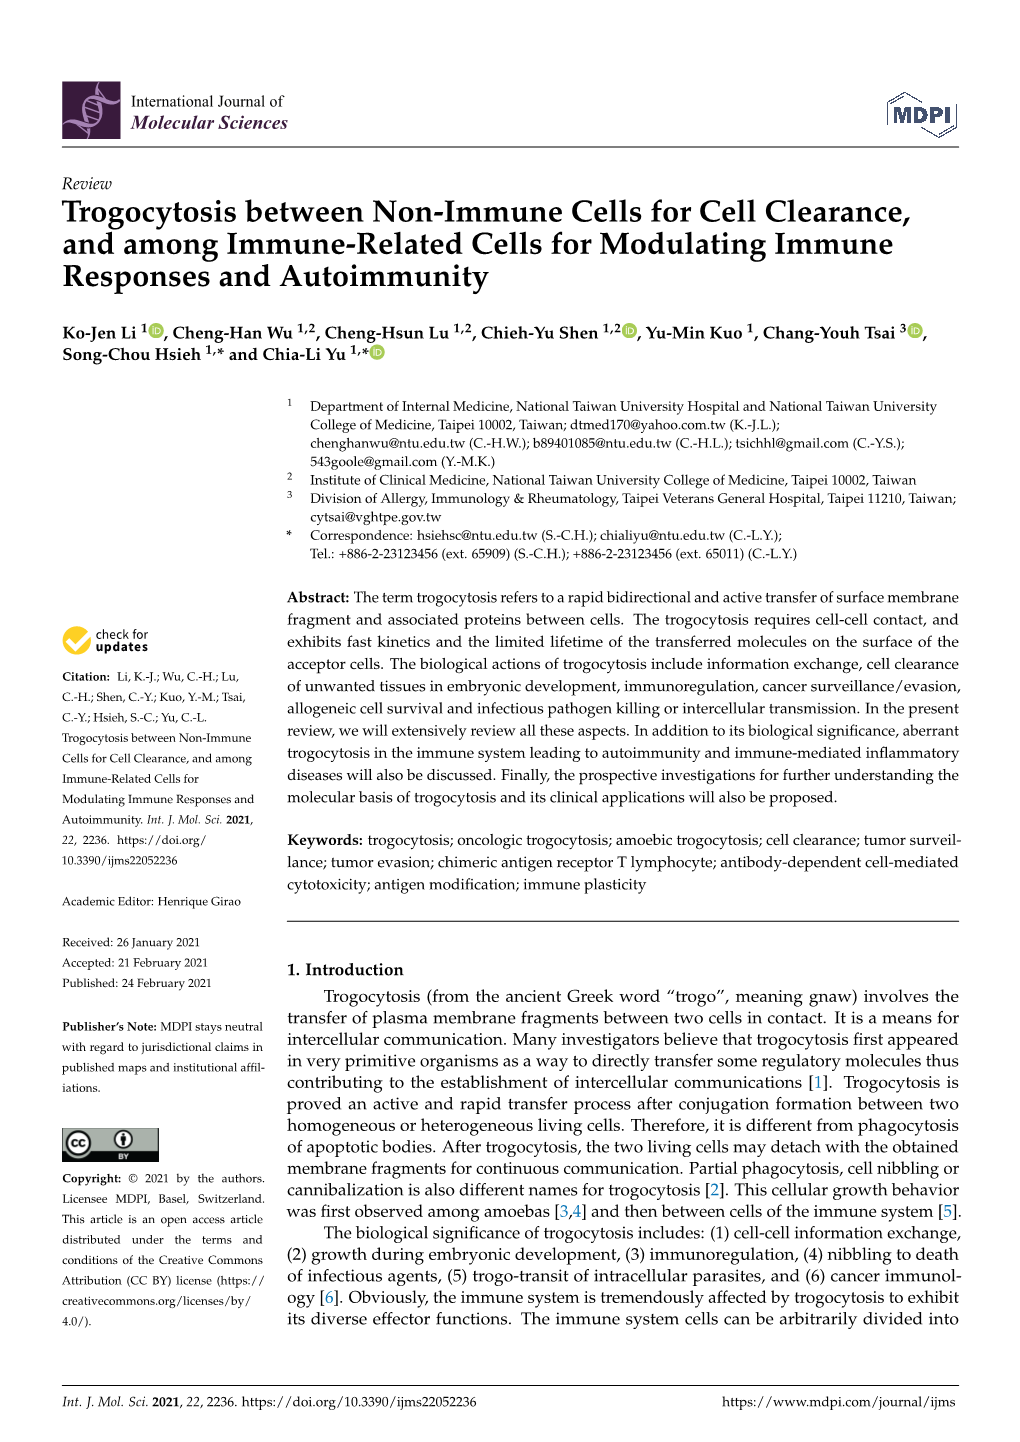 Trogocytosis Between Non-Immune Cells for Cell Clearance, and Among Immune-Related Cells for Modulating Immune Responses and Autoimmunity